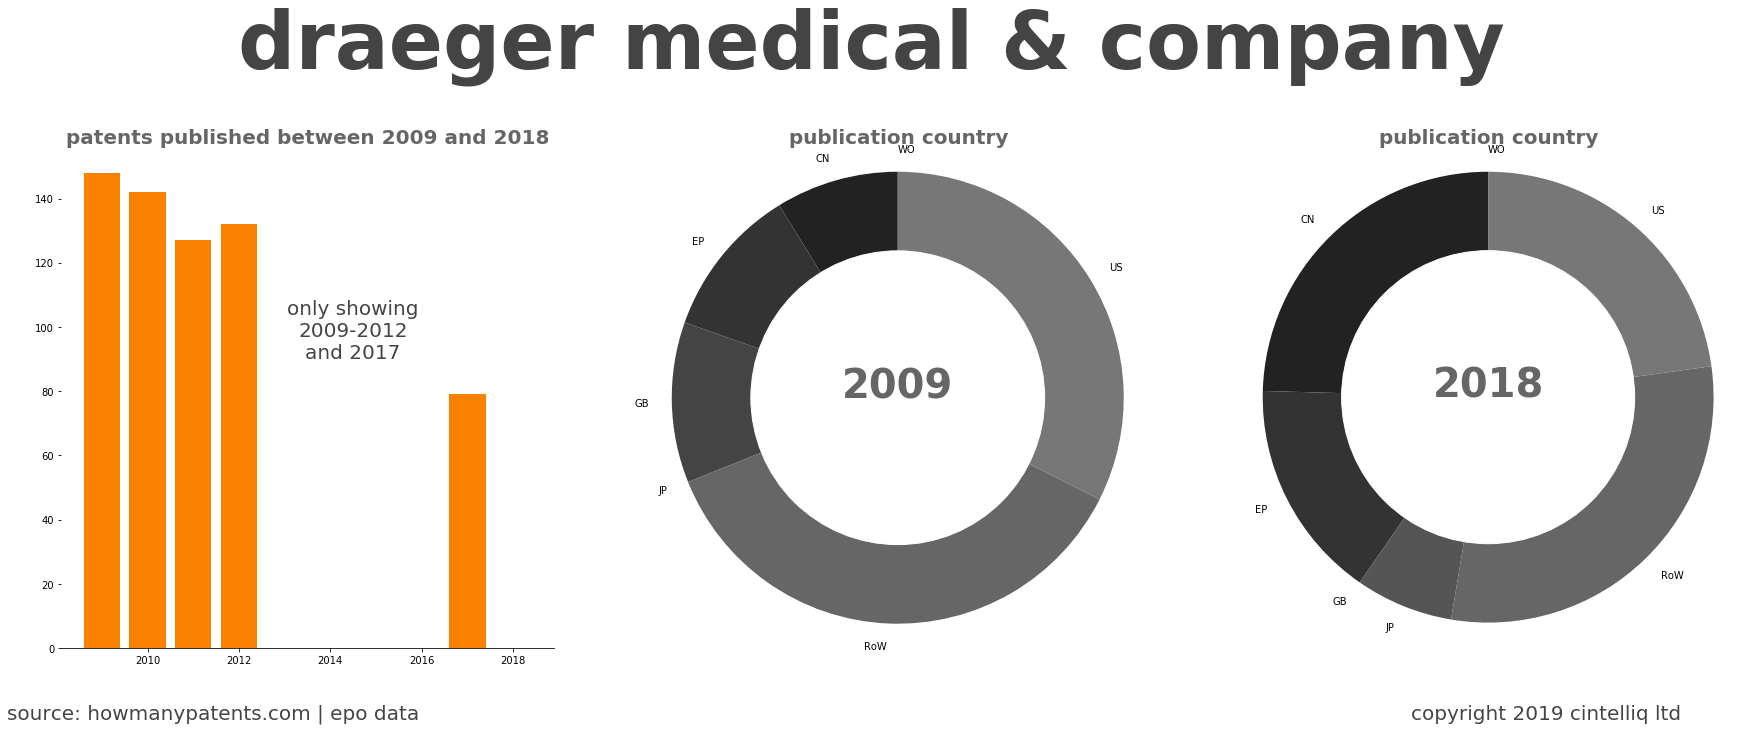 summary of patents for Draeger Medical & Company